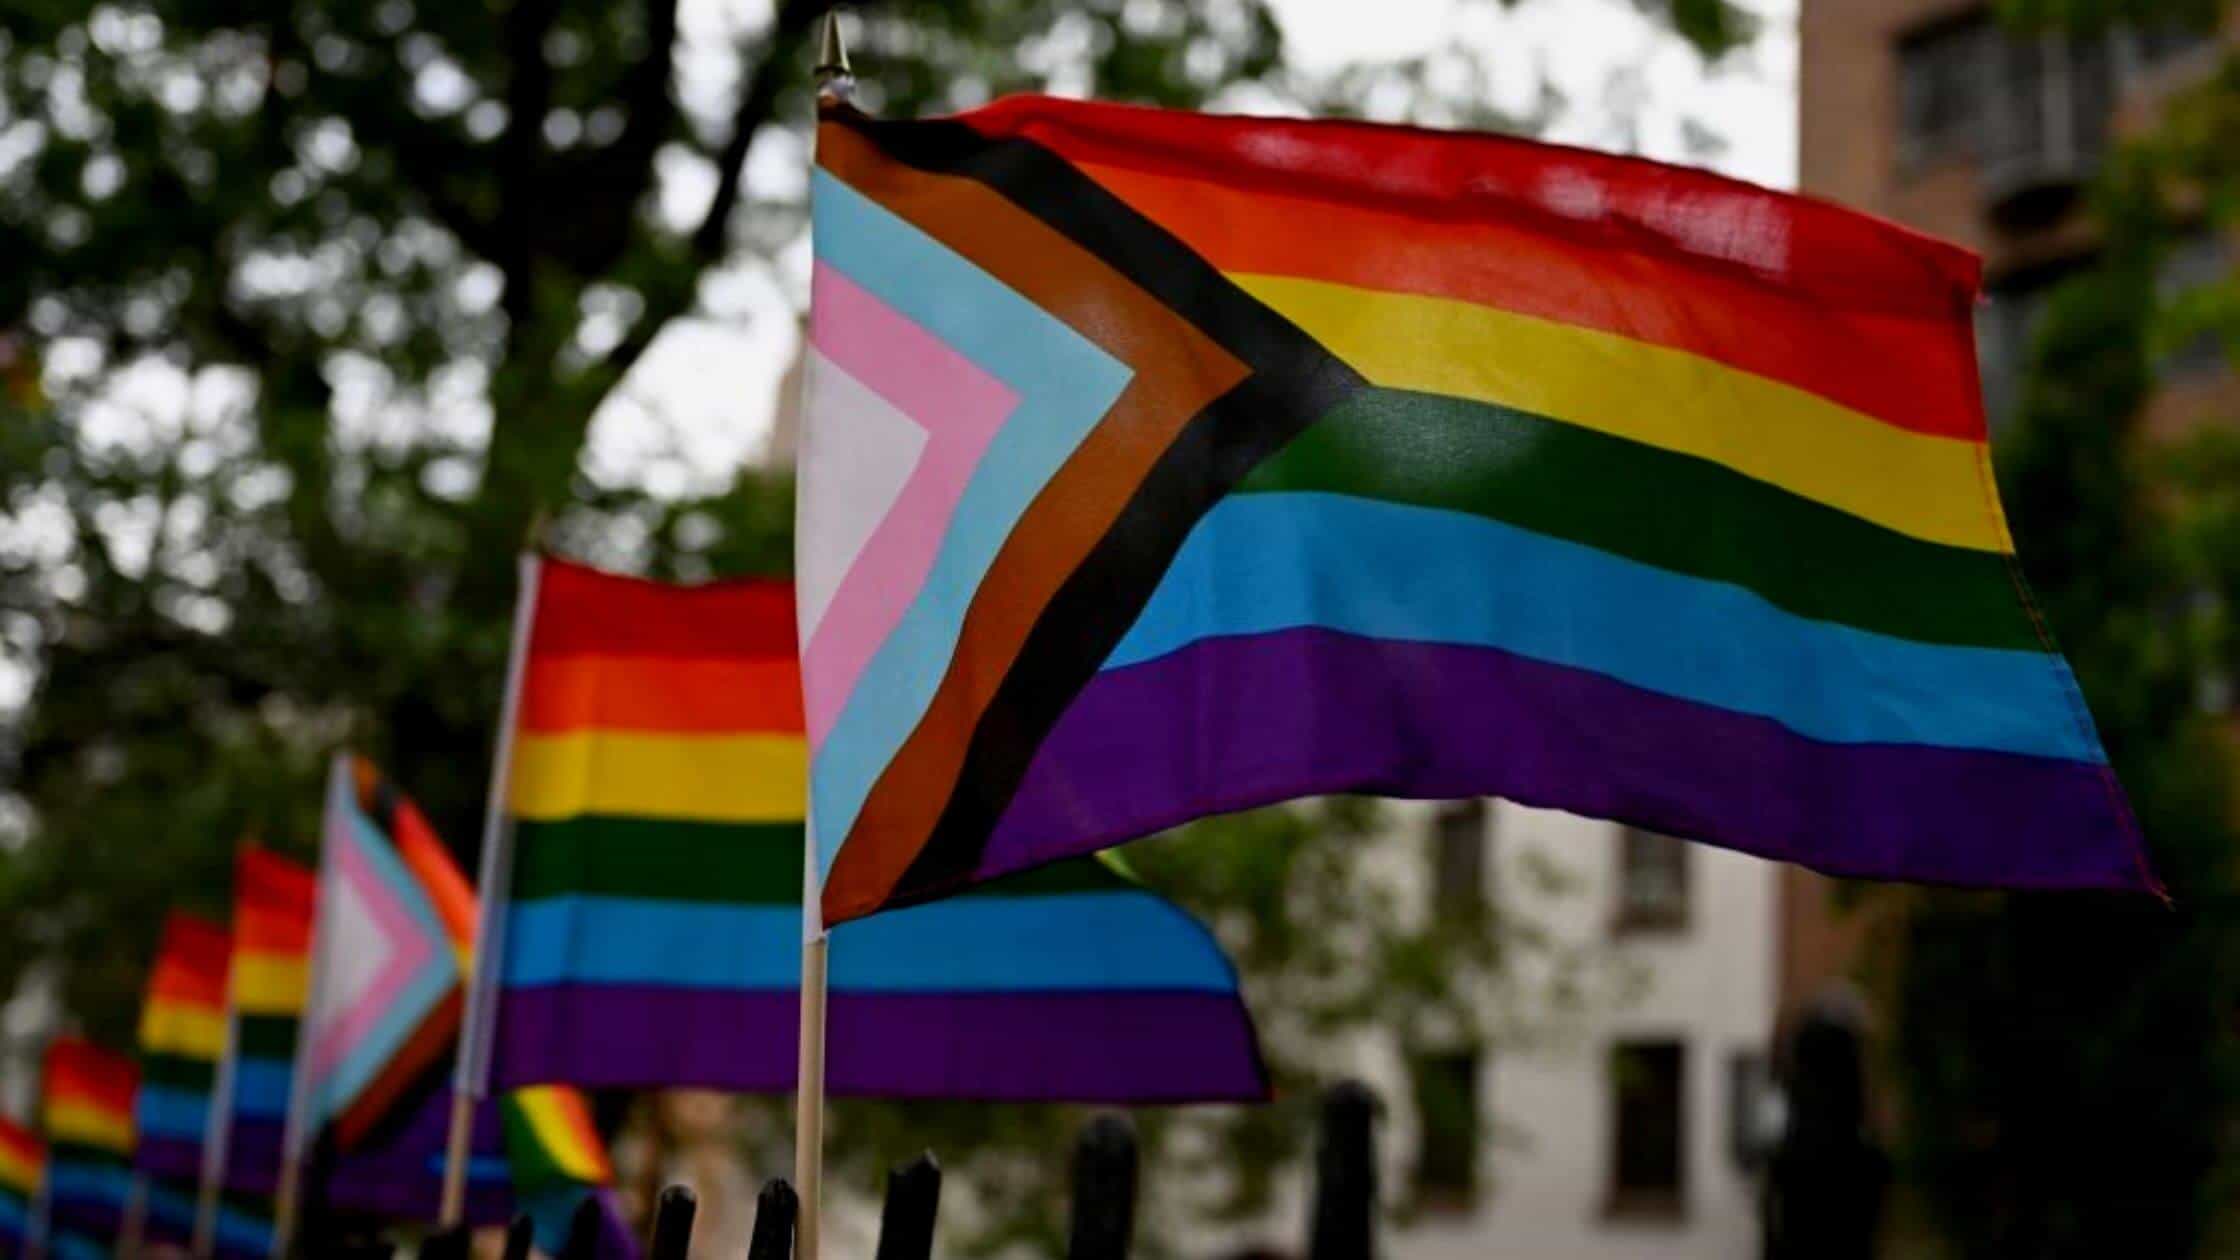 A Michigan Church Sues The State For Newly Added LGBTQ Civil Rights